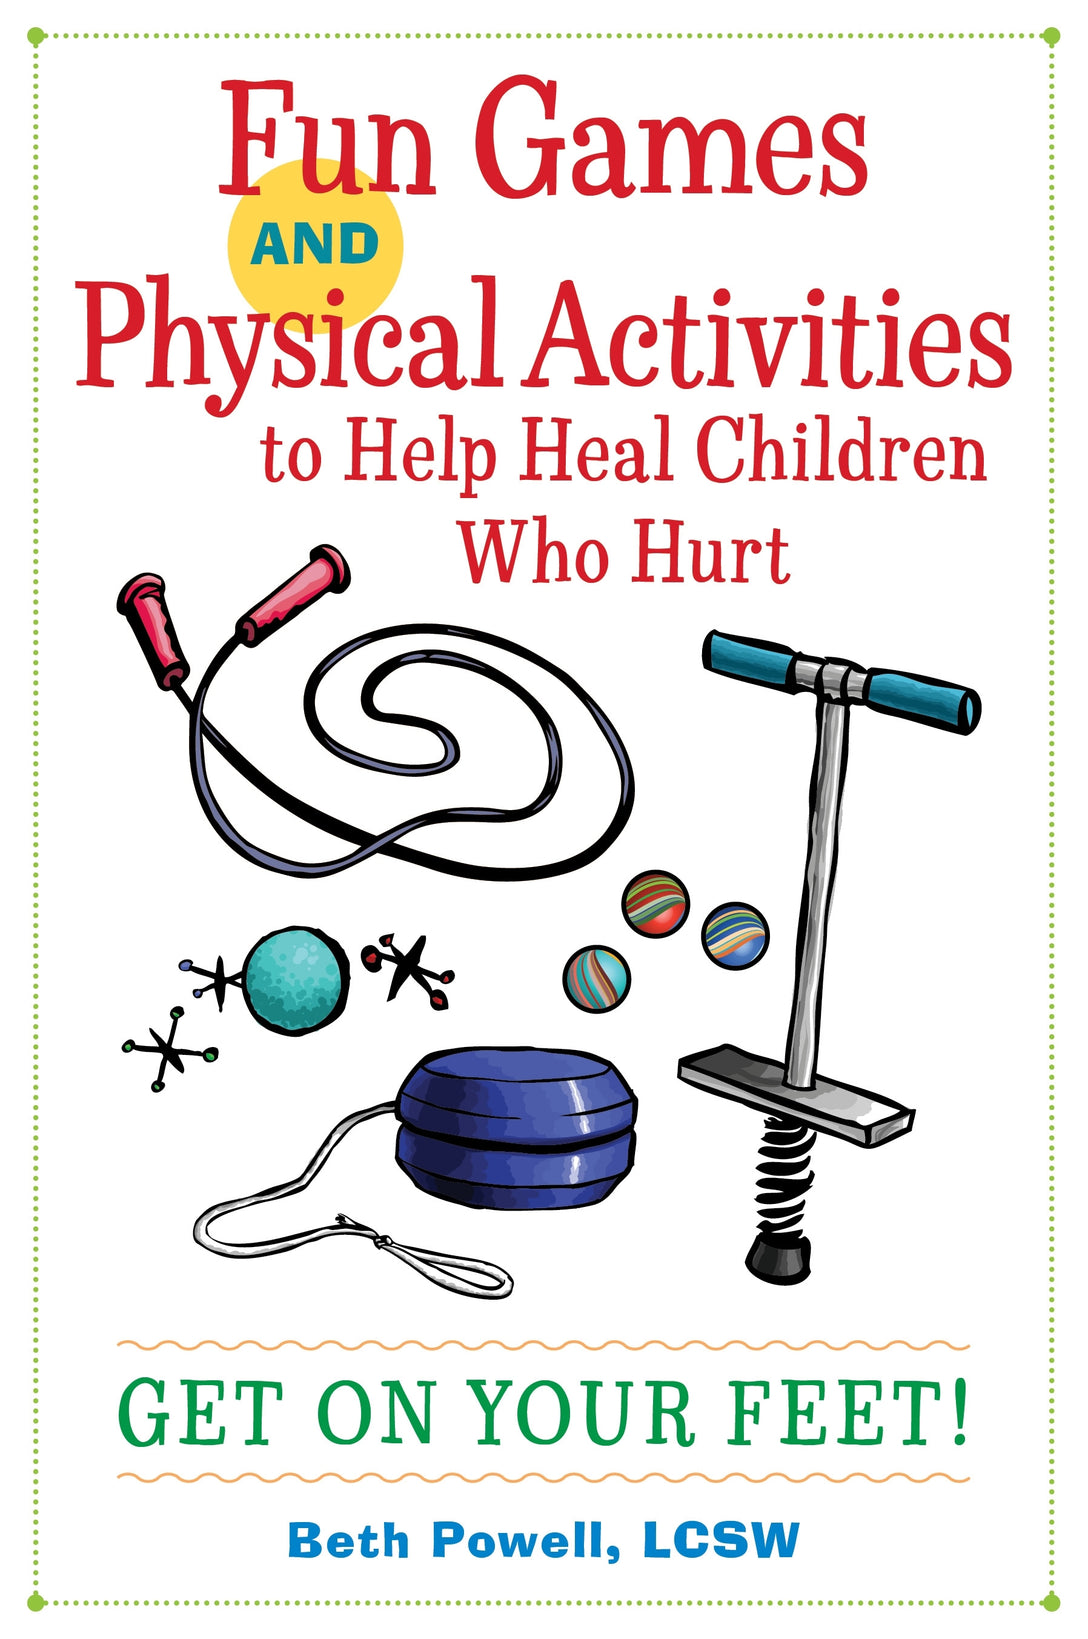 Fun Games and Physical Activities to Help Heal Children Who Hurt by Beth Powell